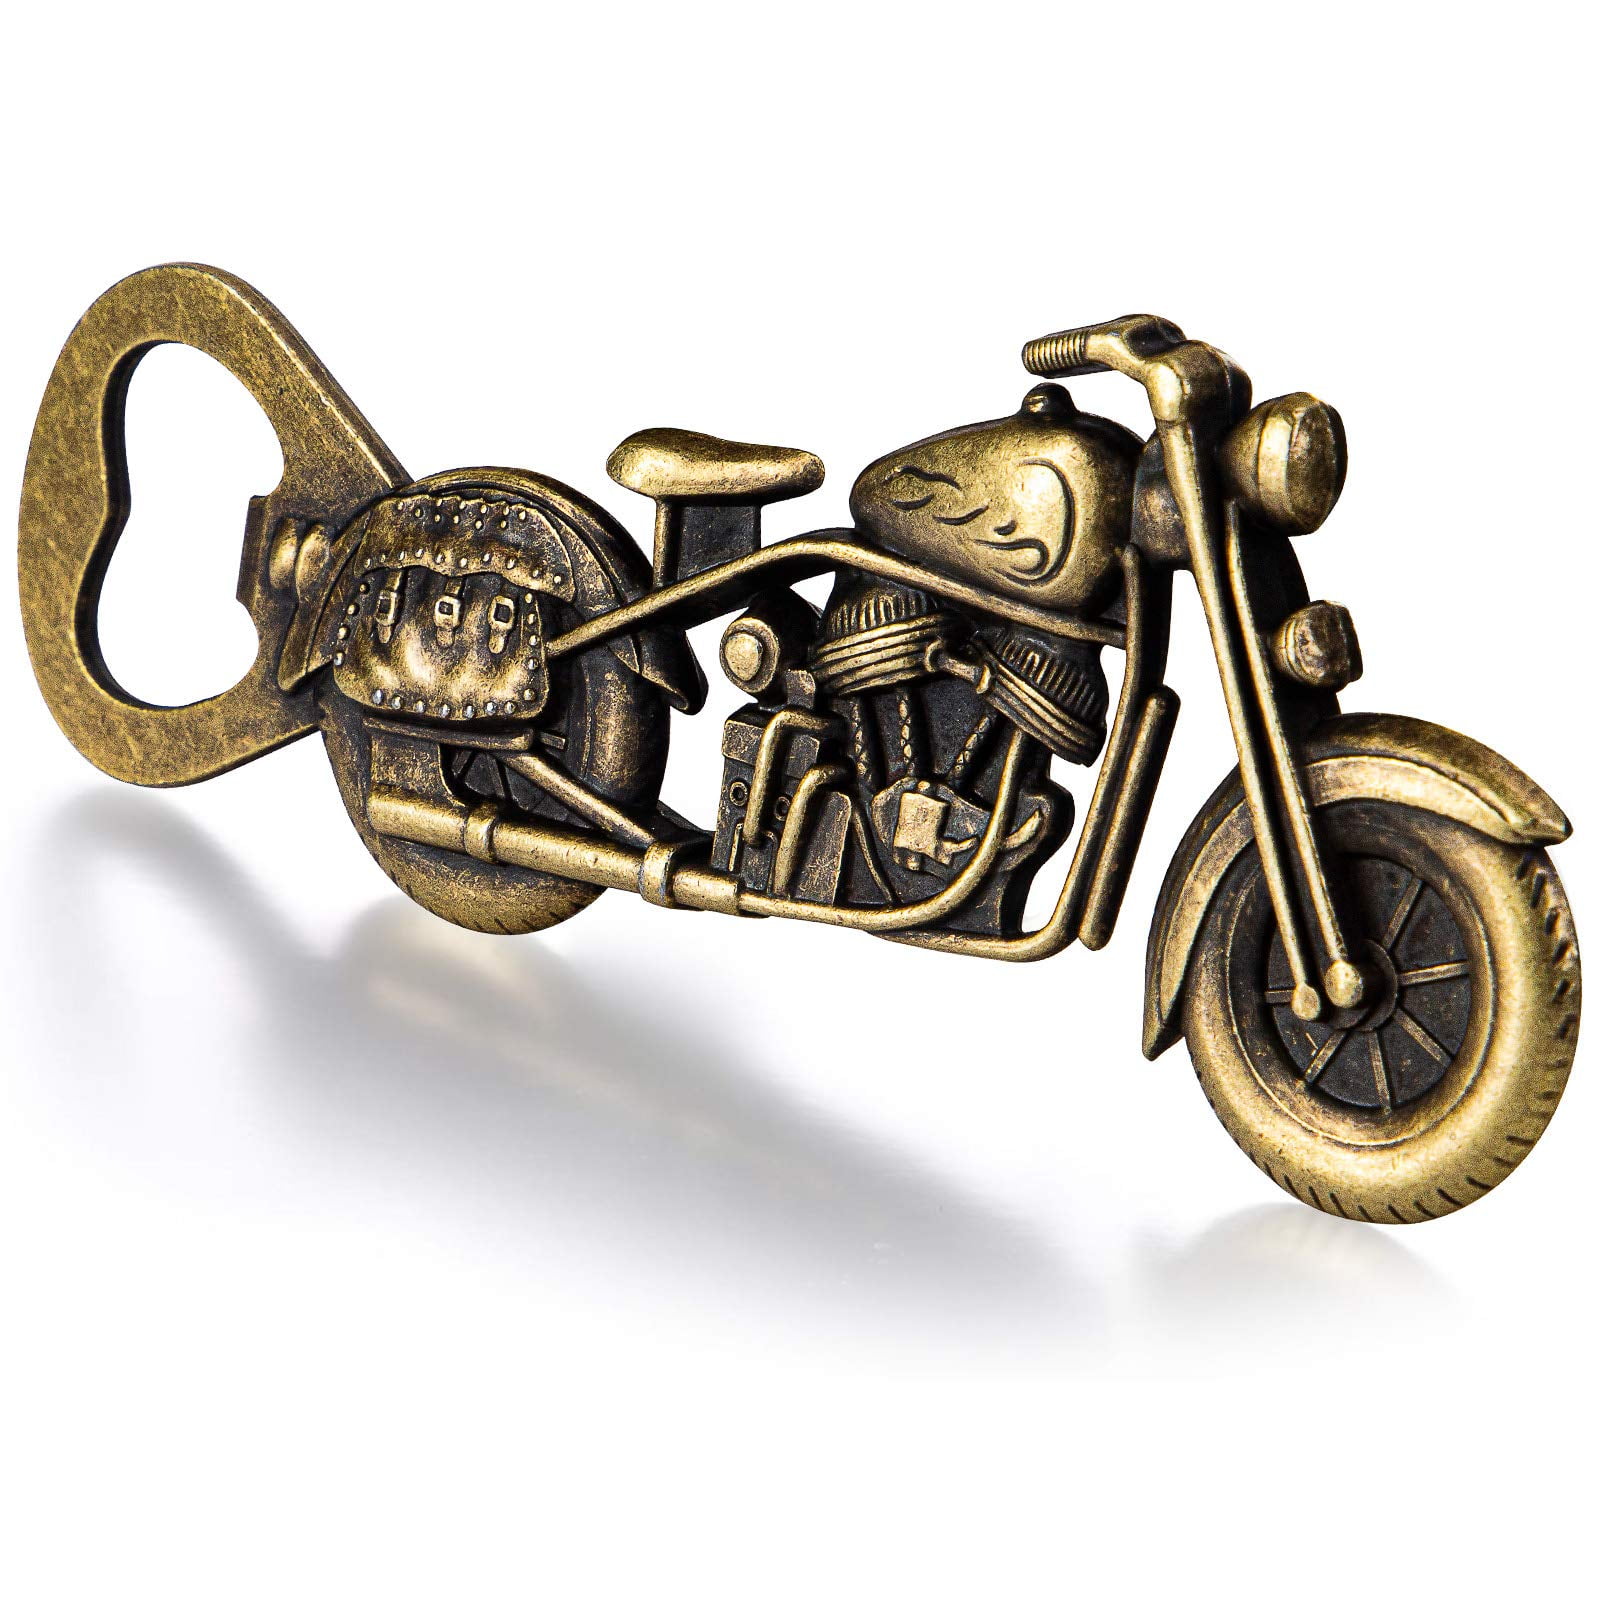 Vintage Motorcycle Beer Bottle Opener Gifts for Men Husband Dad Christmas Motorcycle Gifts for Men Unique Birthday Christmas Stockings Gifts Cool Gadgets 